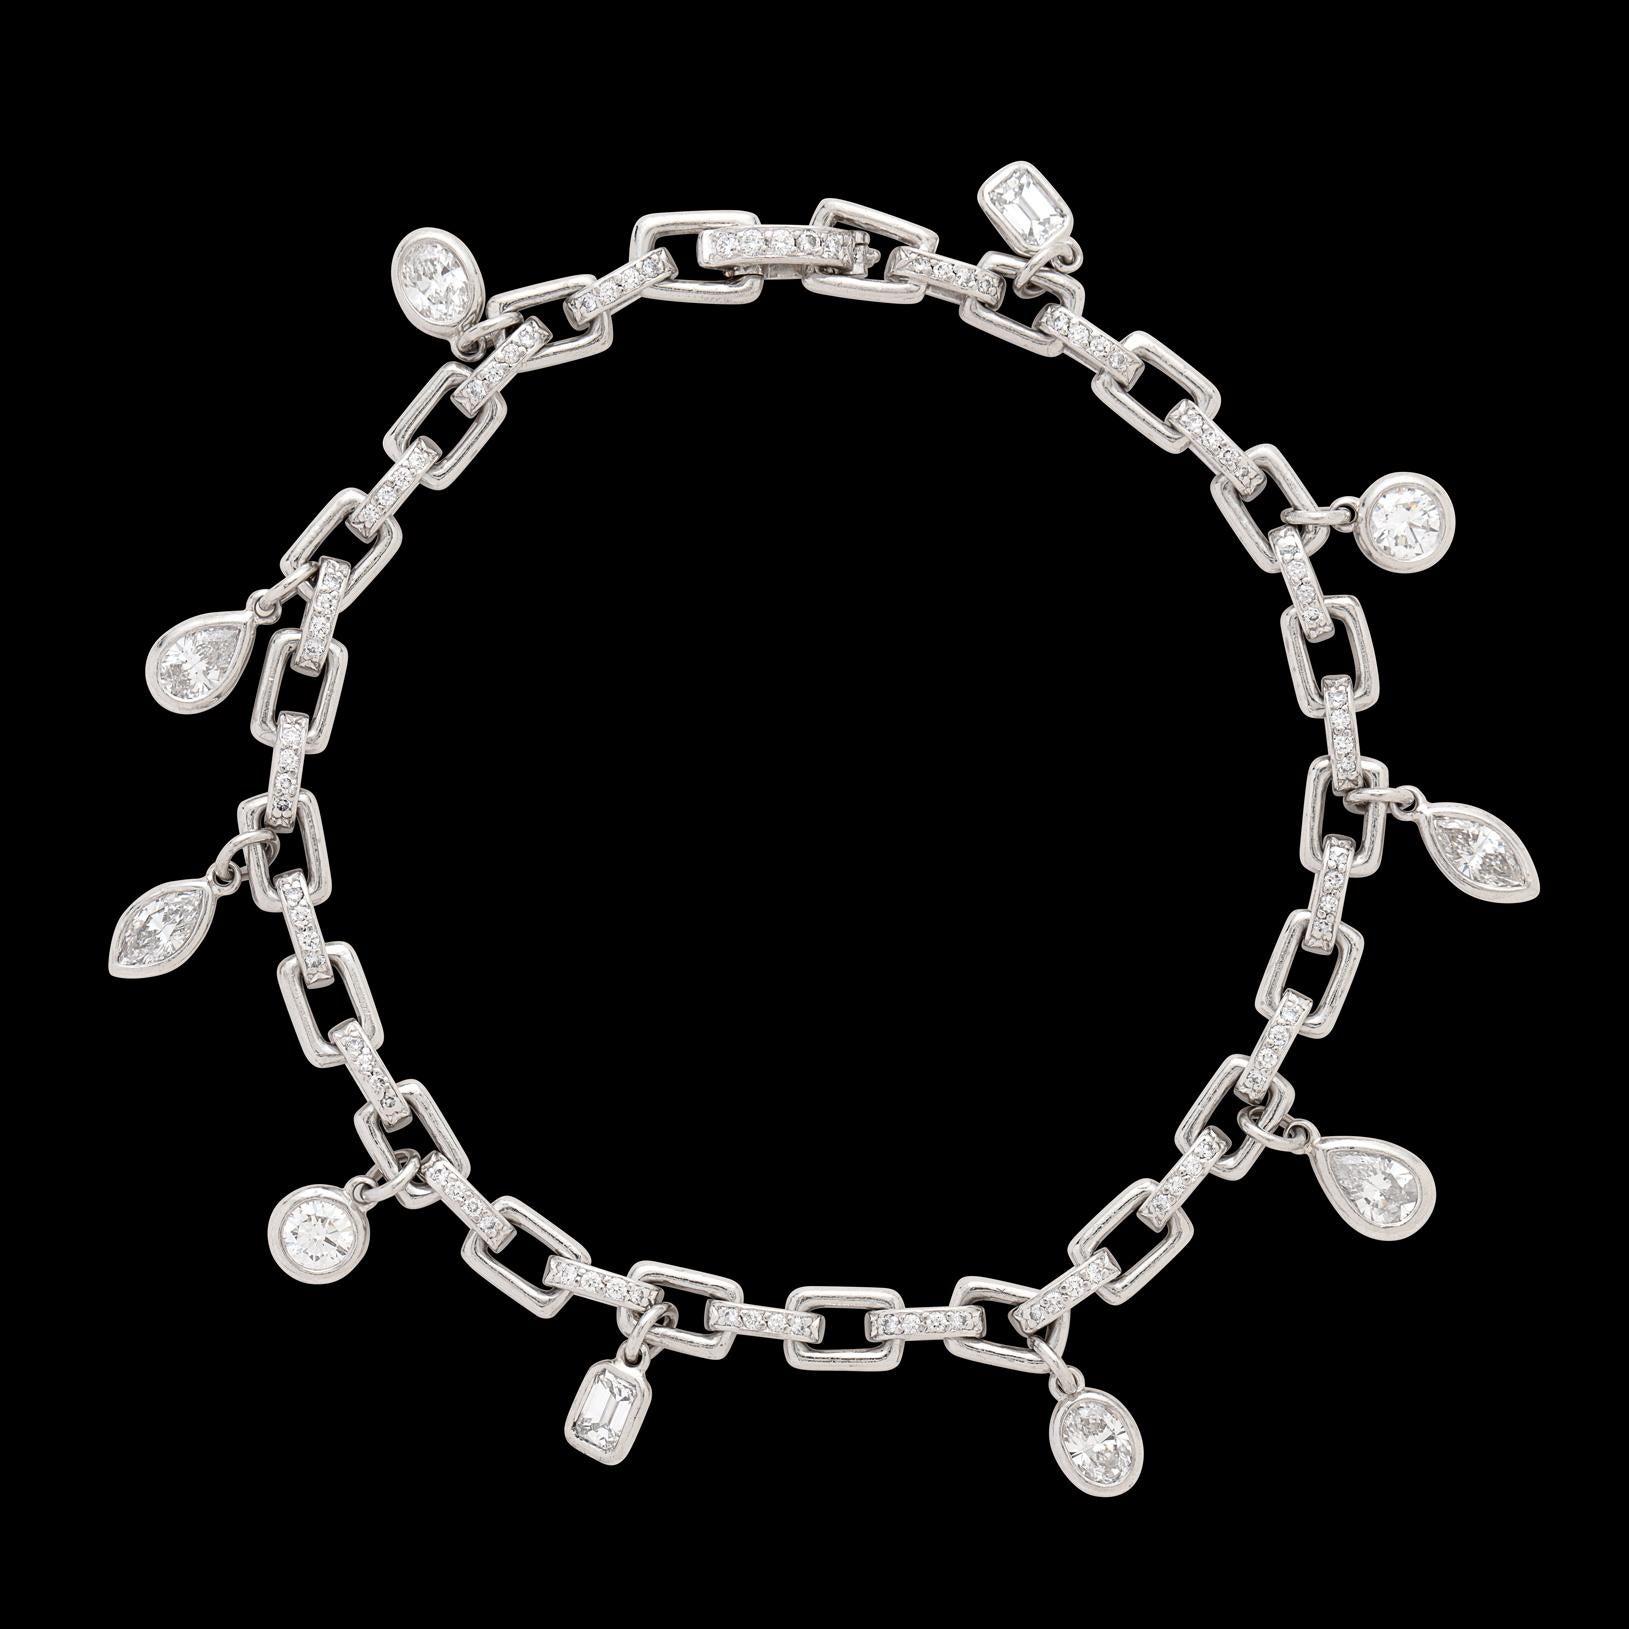 A wonderful spin on the charm bracelet, by renowned jewelry Harry Winston! This custom one-of-a-kind platinum link bracelet is set with 80 round brilliant-cut diamonds, and suspends 10 bezel-set diamond charms, of assorted shapes. The total diamond